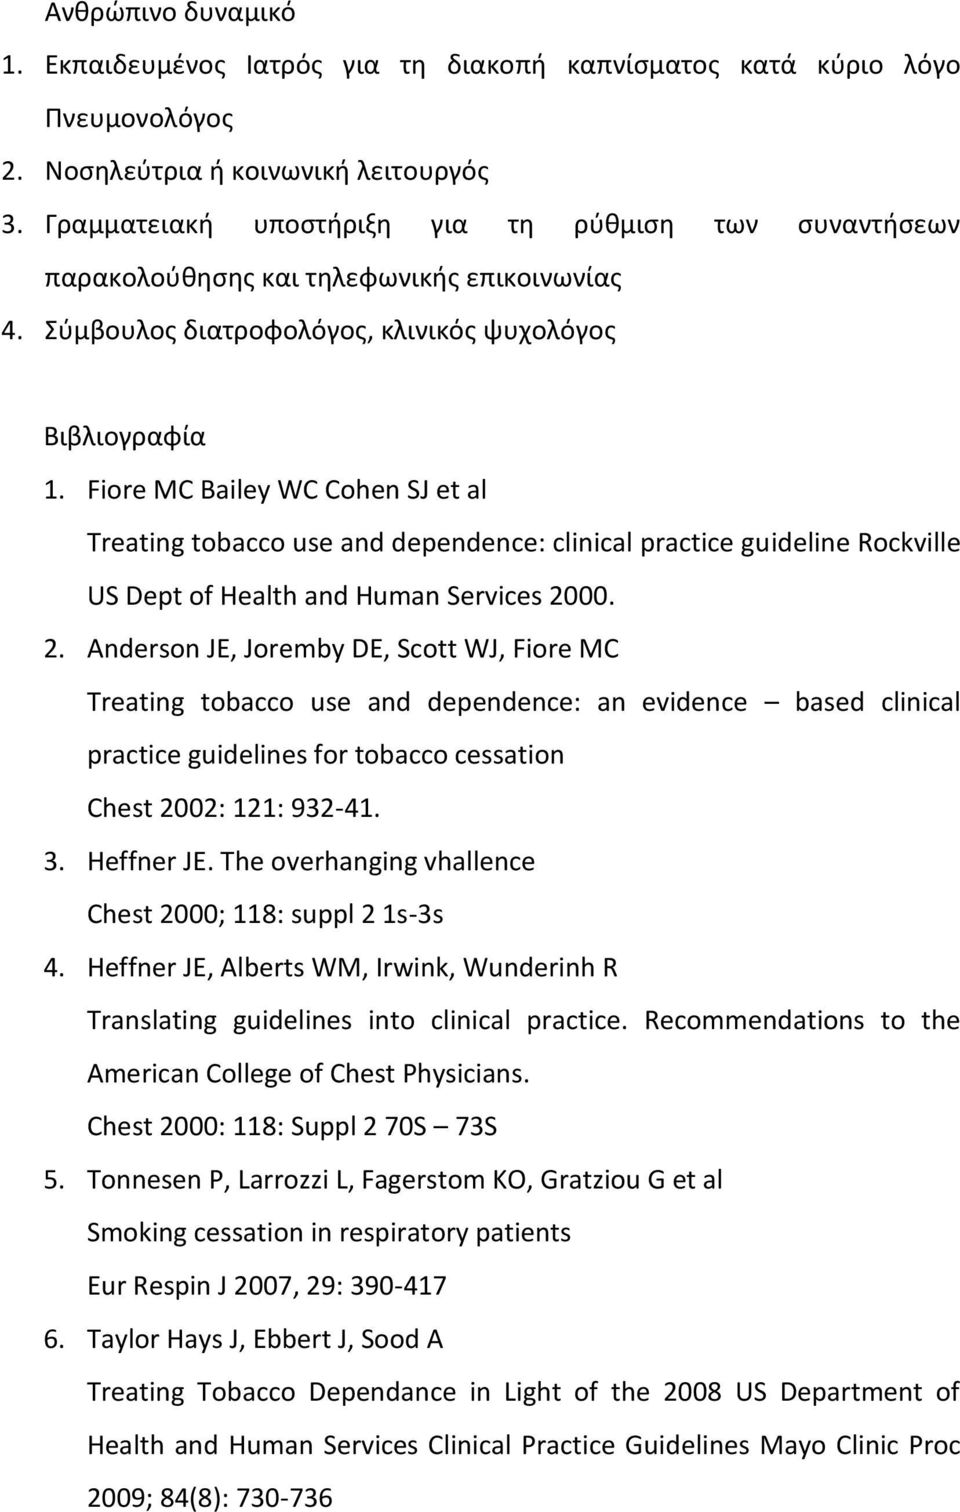 Fiore MC Bailey WC Cohen SJ et al Treating tobacco use and dependence: clinical practice guideline Rockville US Dept of Health and Human Services 20